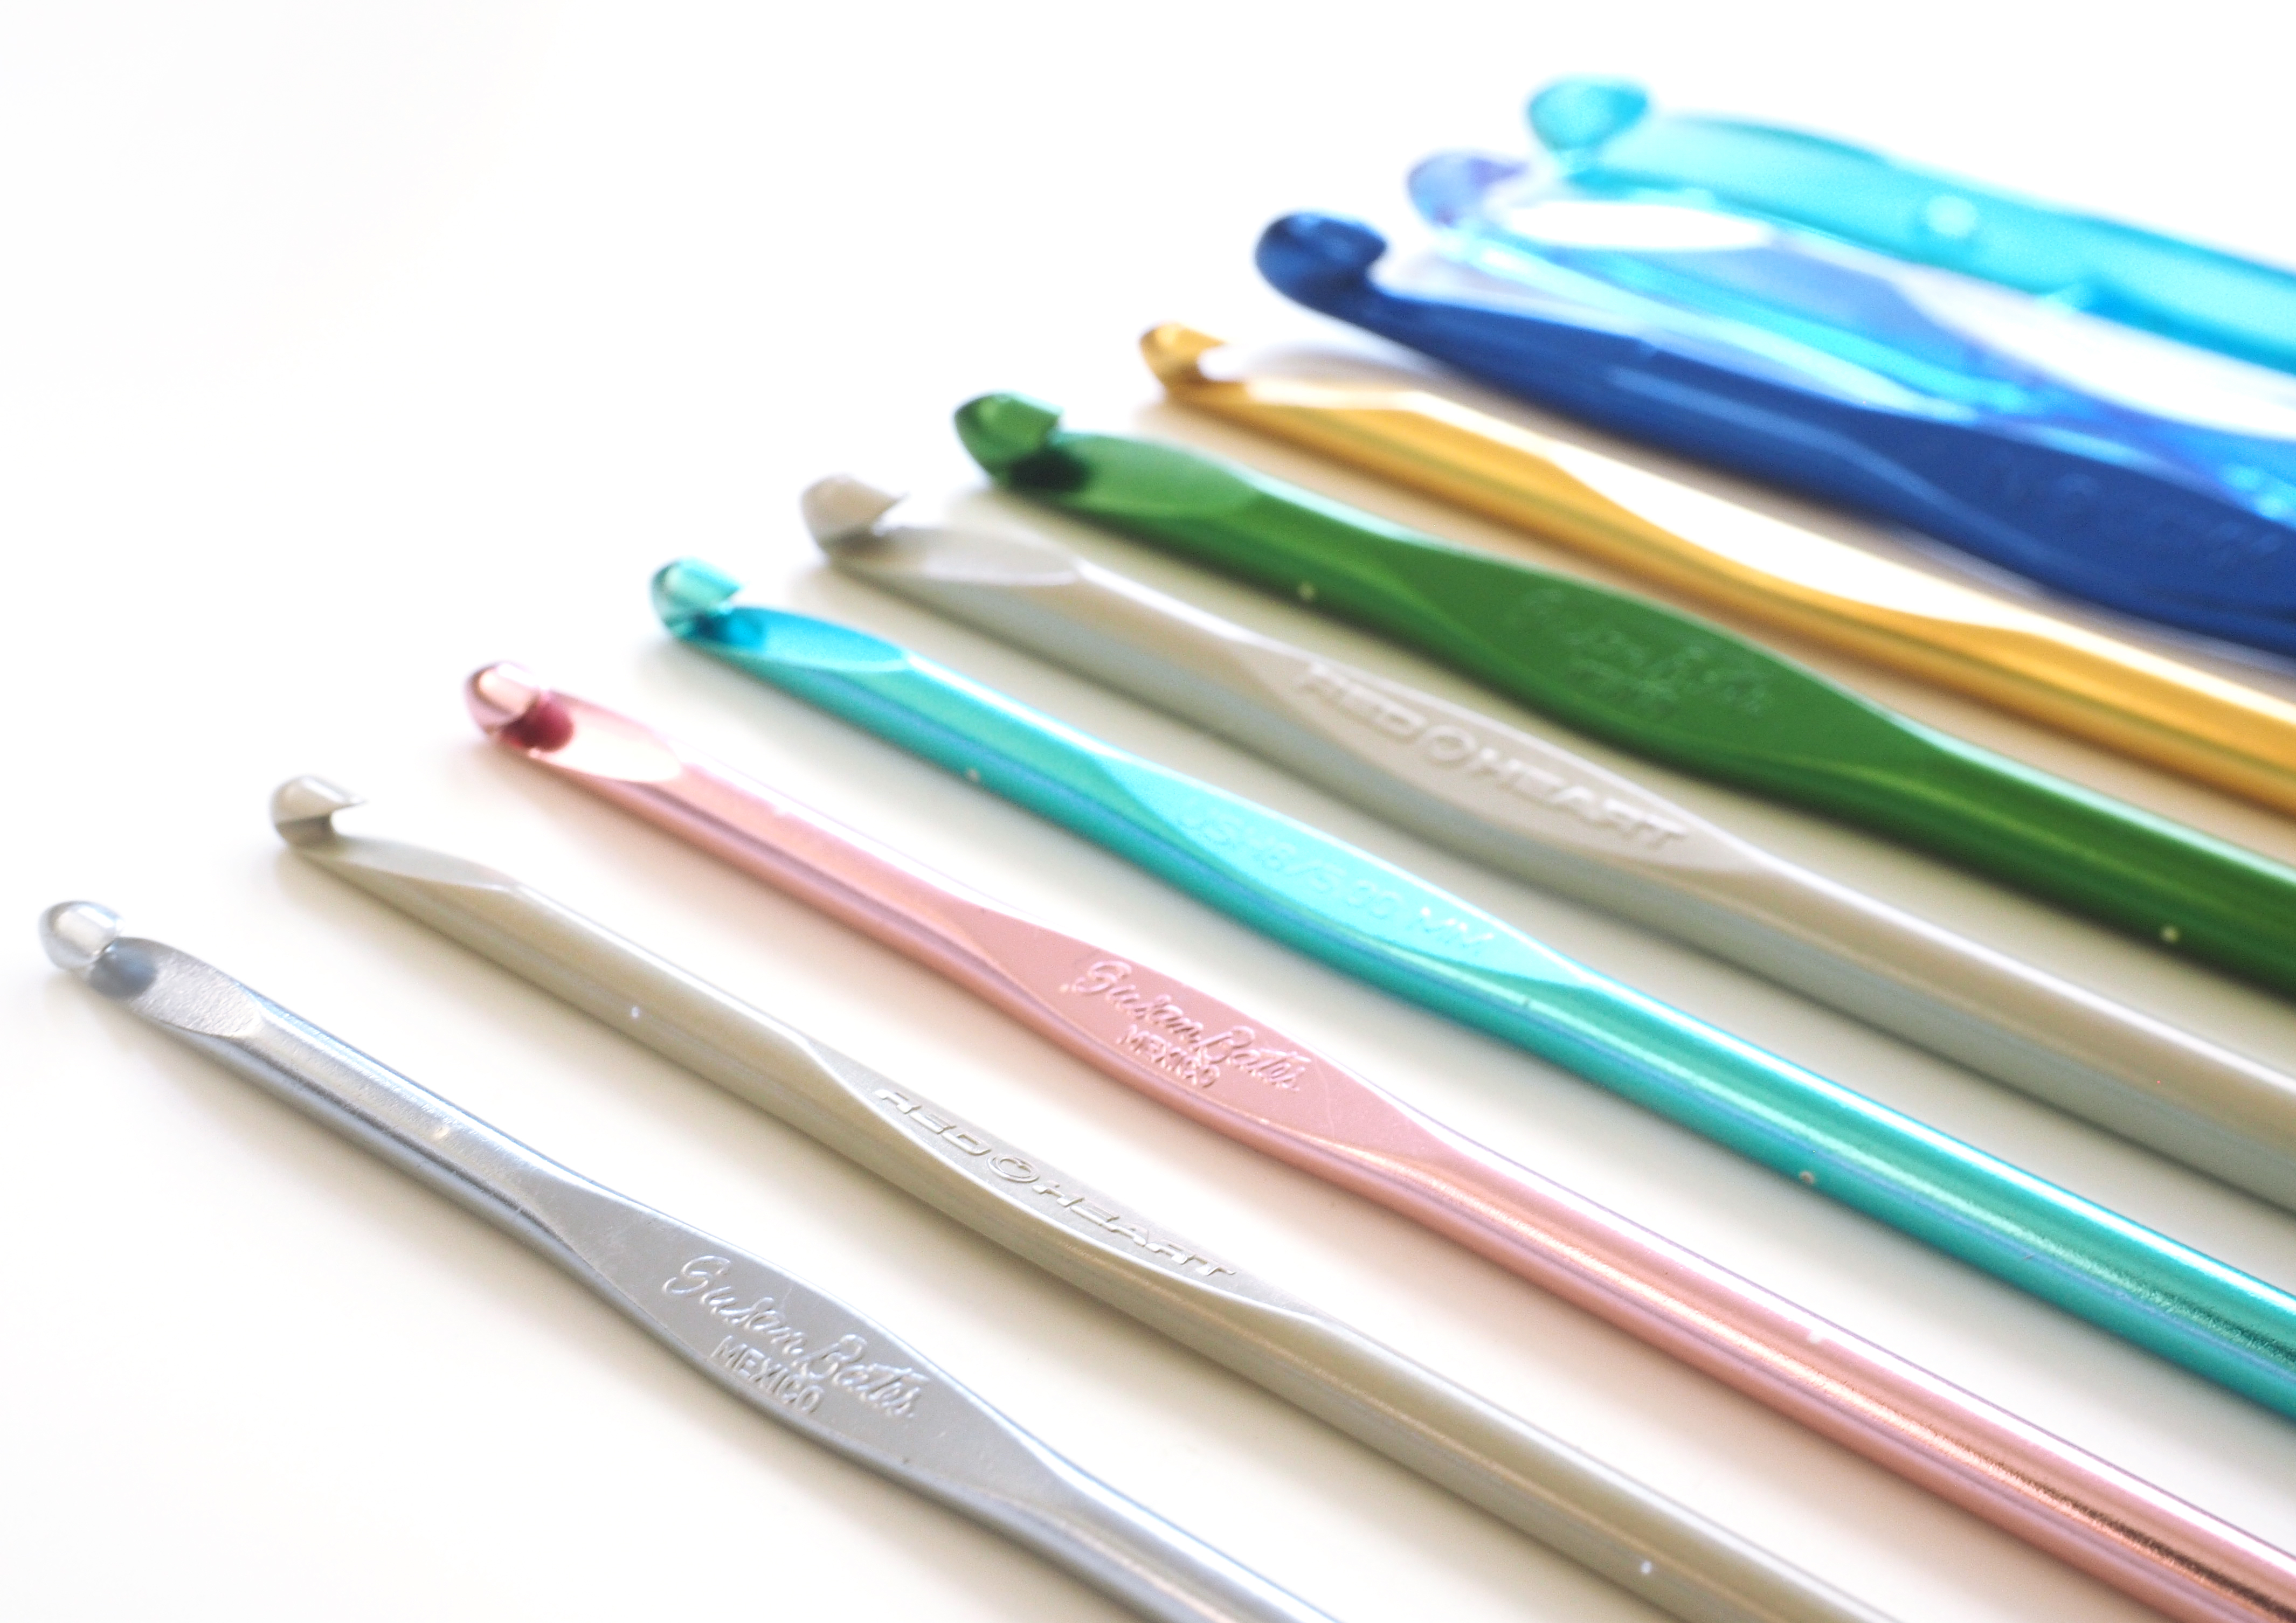 Crochet Hooks - This guide will provide you with tools and offer an extensive knowledge on everything you need to know about the different types of crochet hooks. #CrochetHookSizes #CrochetHook #CrochetNeedles